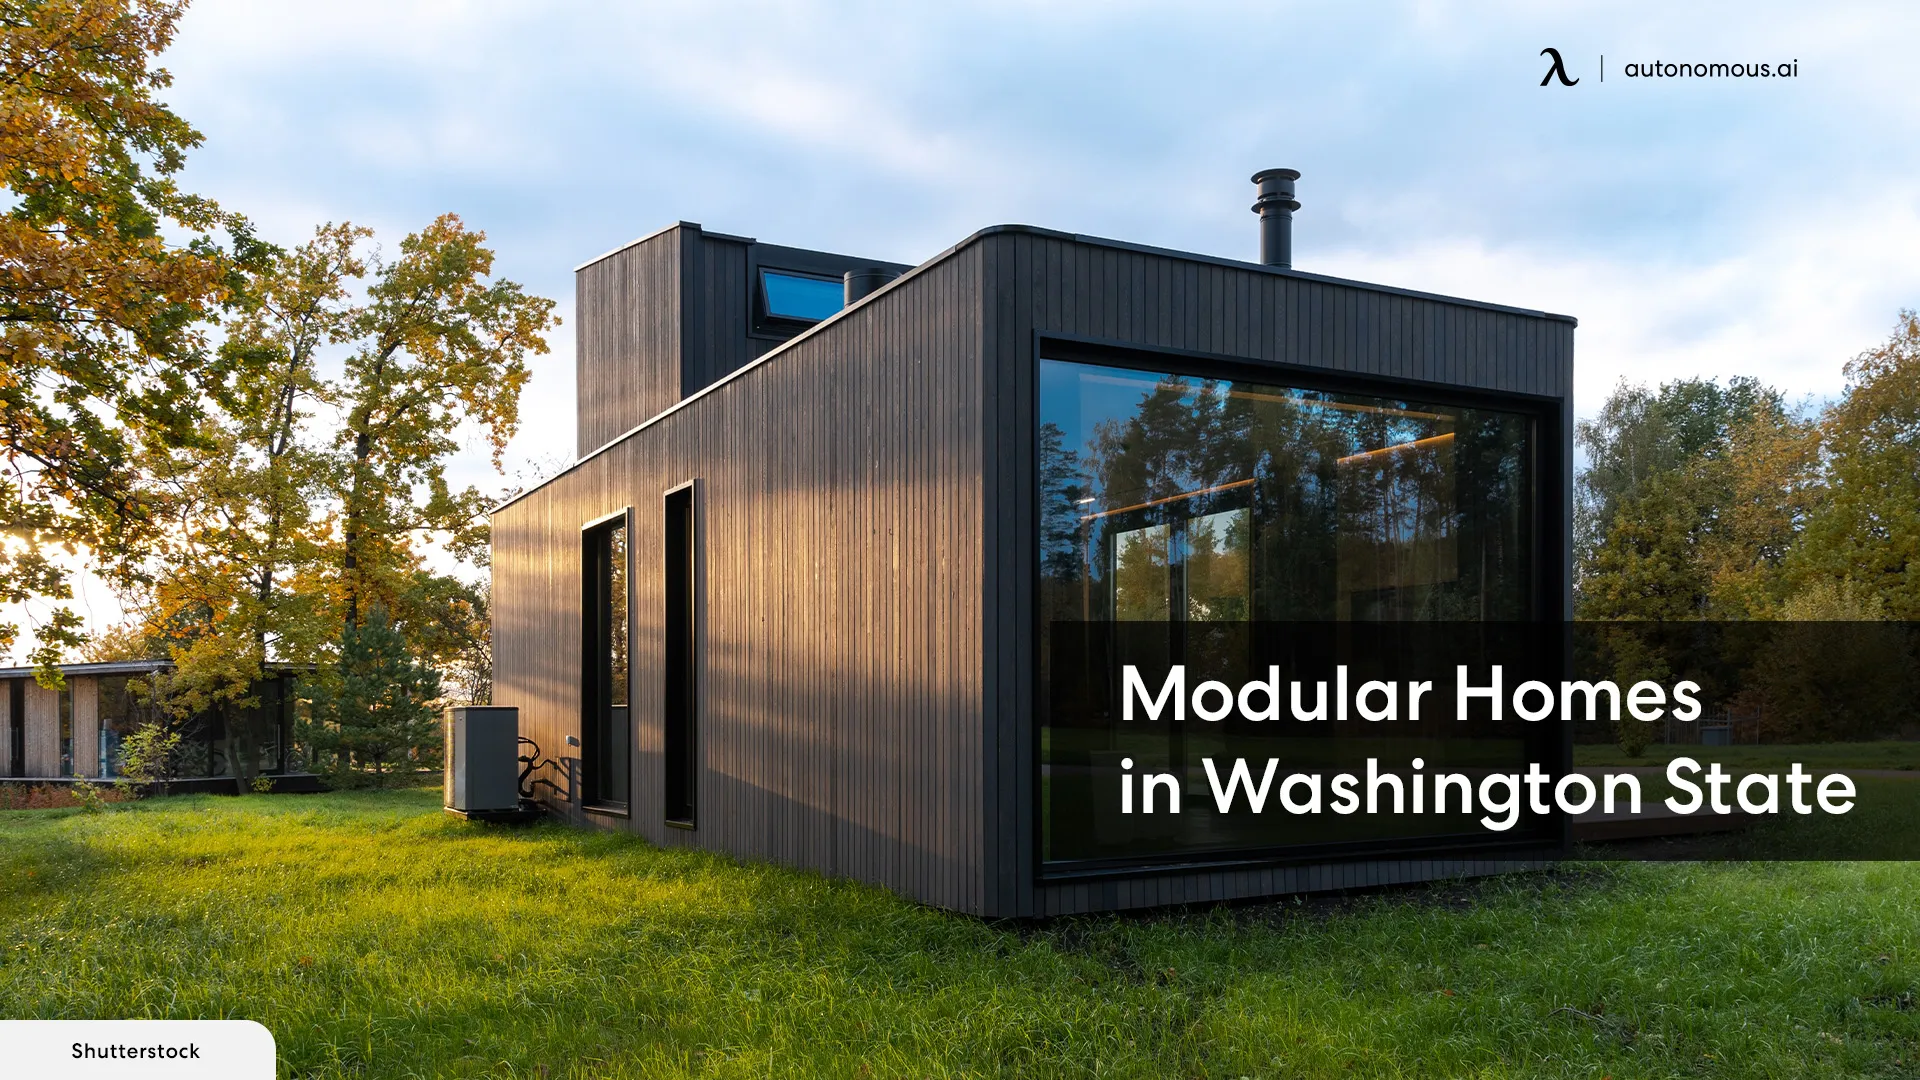 Modular Homes in Washington State: Codes, Regulations, and Requirements